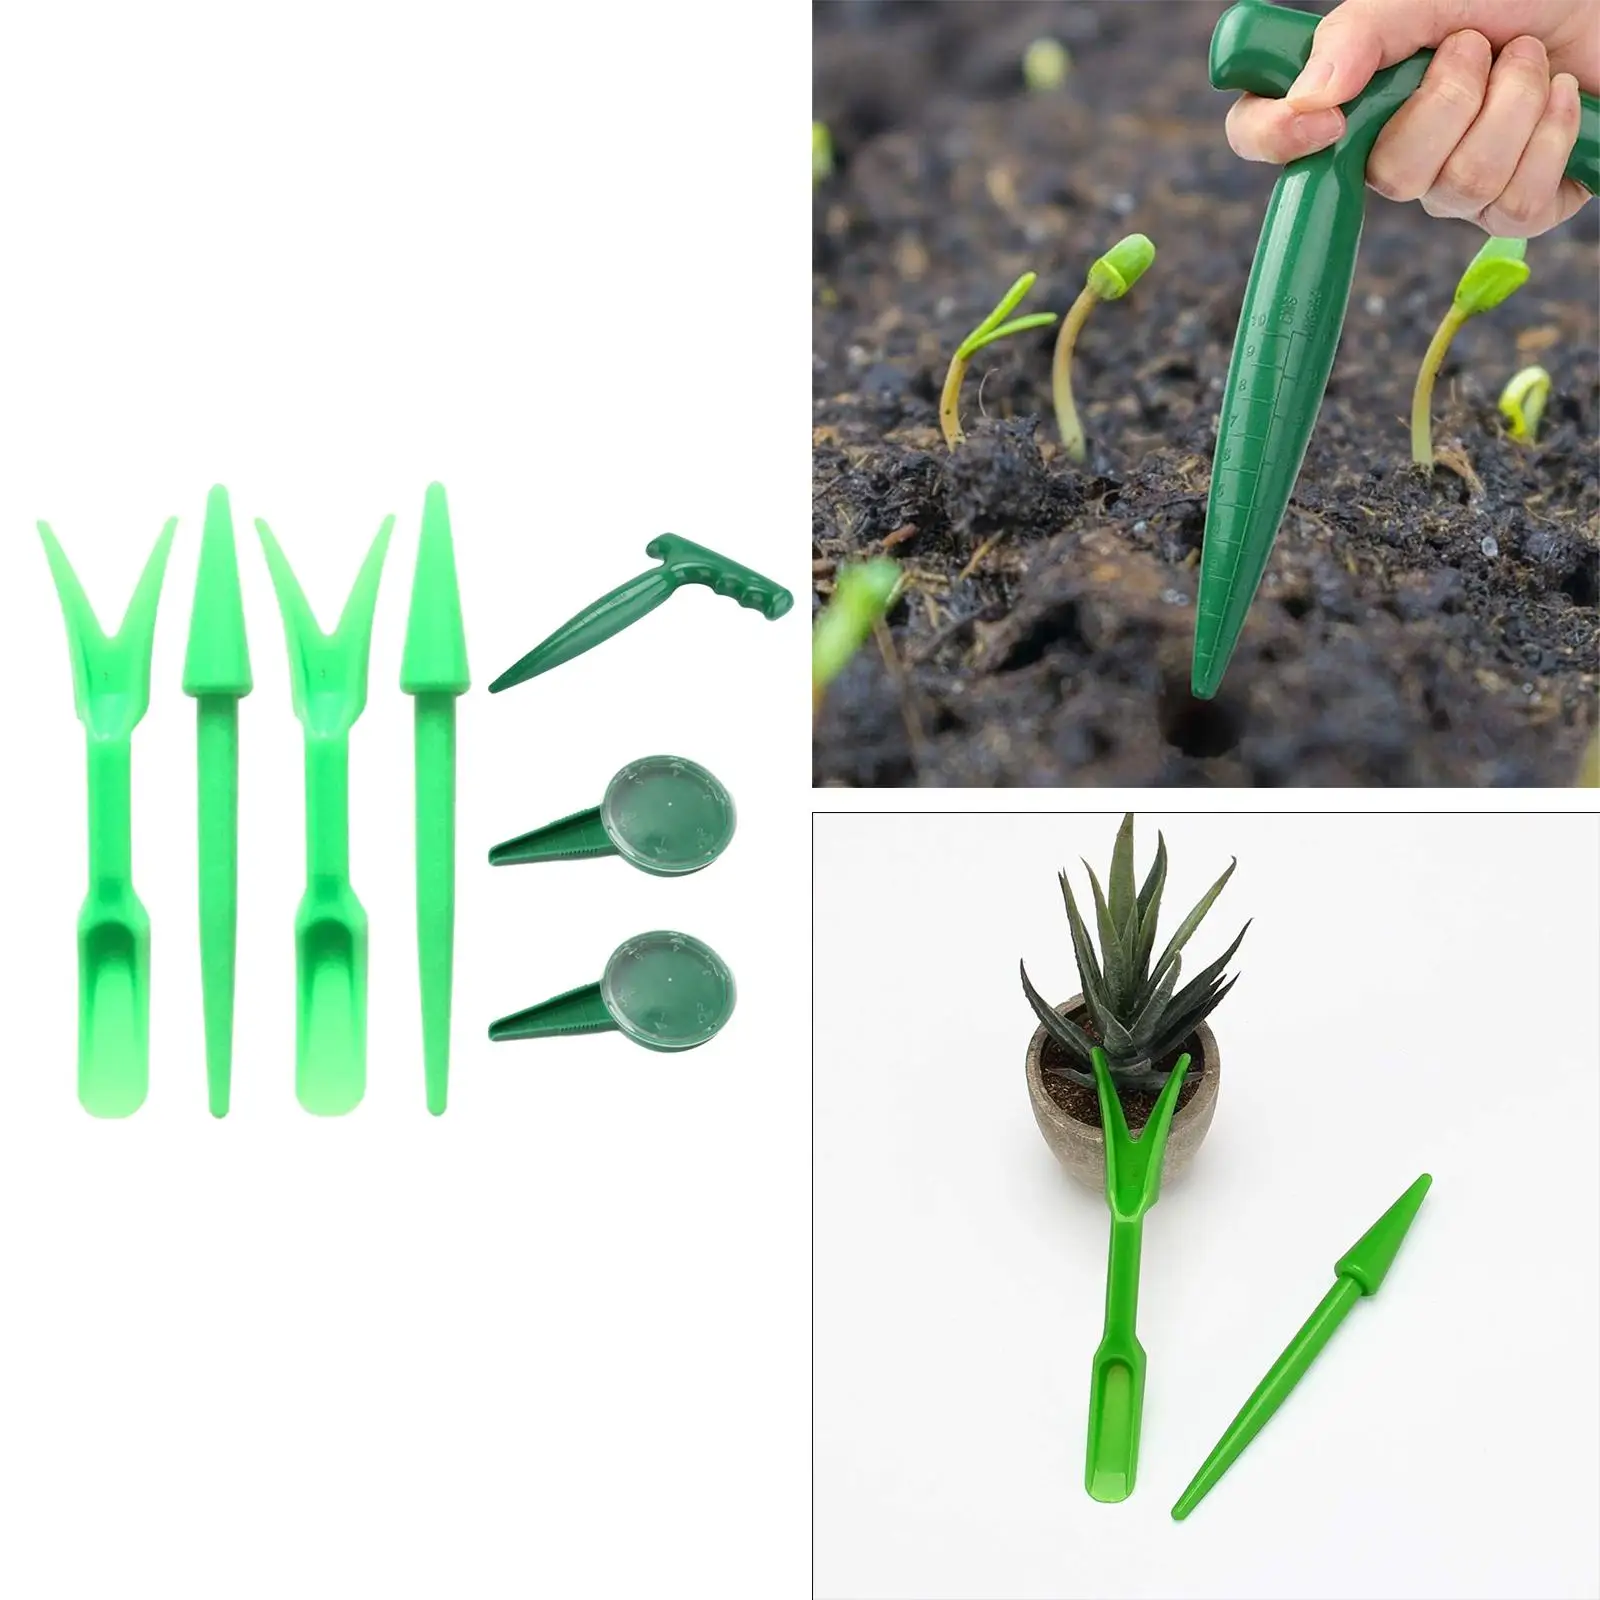 7x Sowing Seeds Dispenser Set Lightweight Handheld Seed Planter Tool for Outdoor Garden Plant Pot Tool Sets Planting Flowers